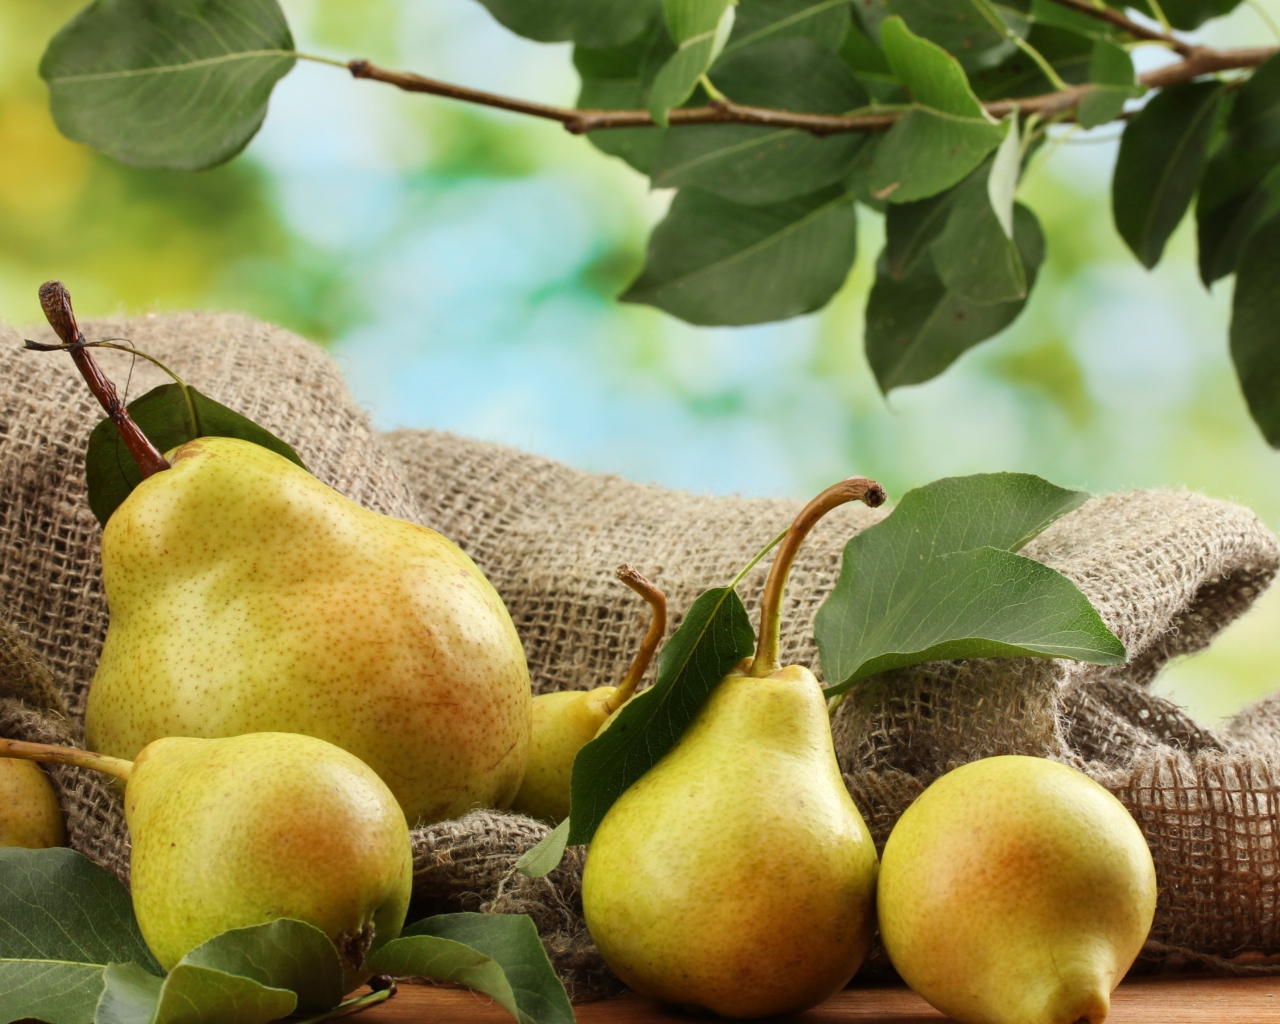 Fresh Pears With Leaves wallpaper 1280x1024